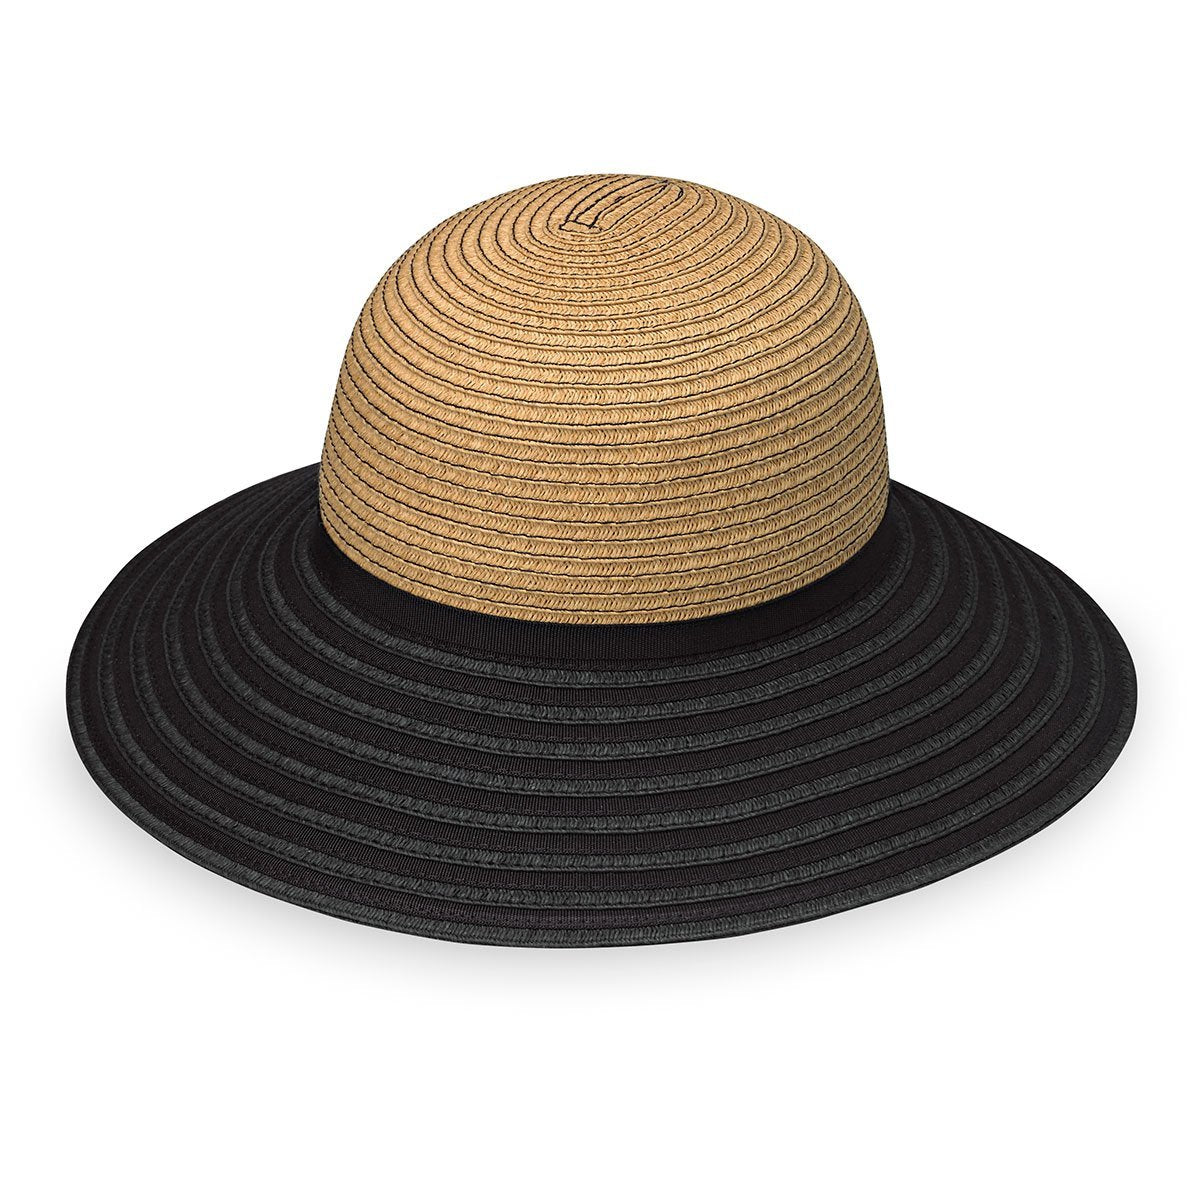 Featuring Front of Women's Packable Wide Brim Riviera UPF Sun Hat in Camel Black from Wallaroo